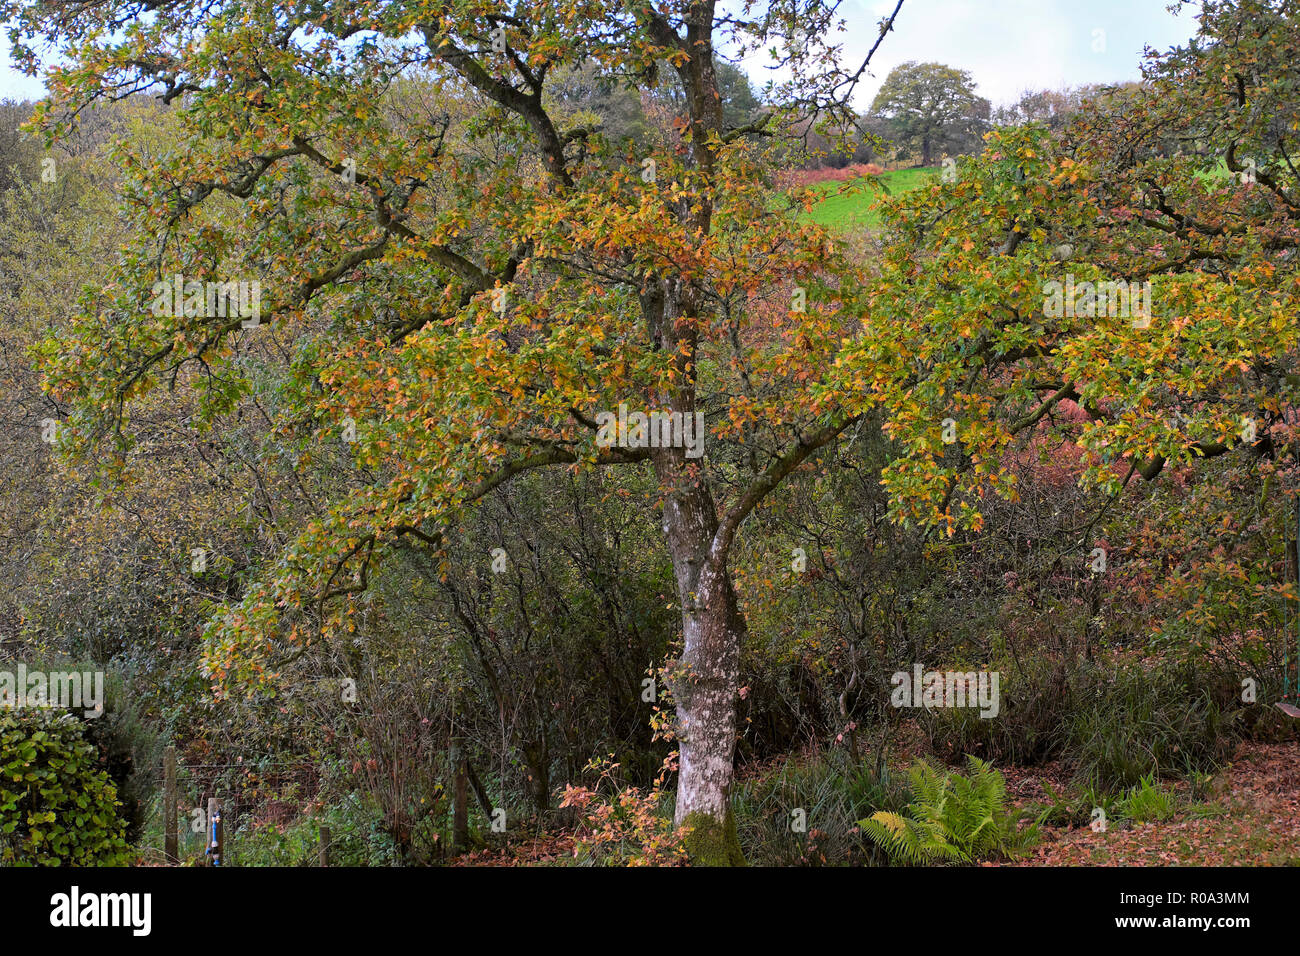 Colourful autumn leaves on oak tree and woodland in late October in Carmarthenshire countryside in rural Wales UK  KATHY DEWITT Stock Photo